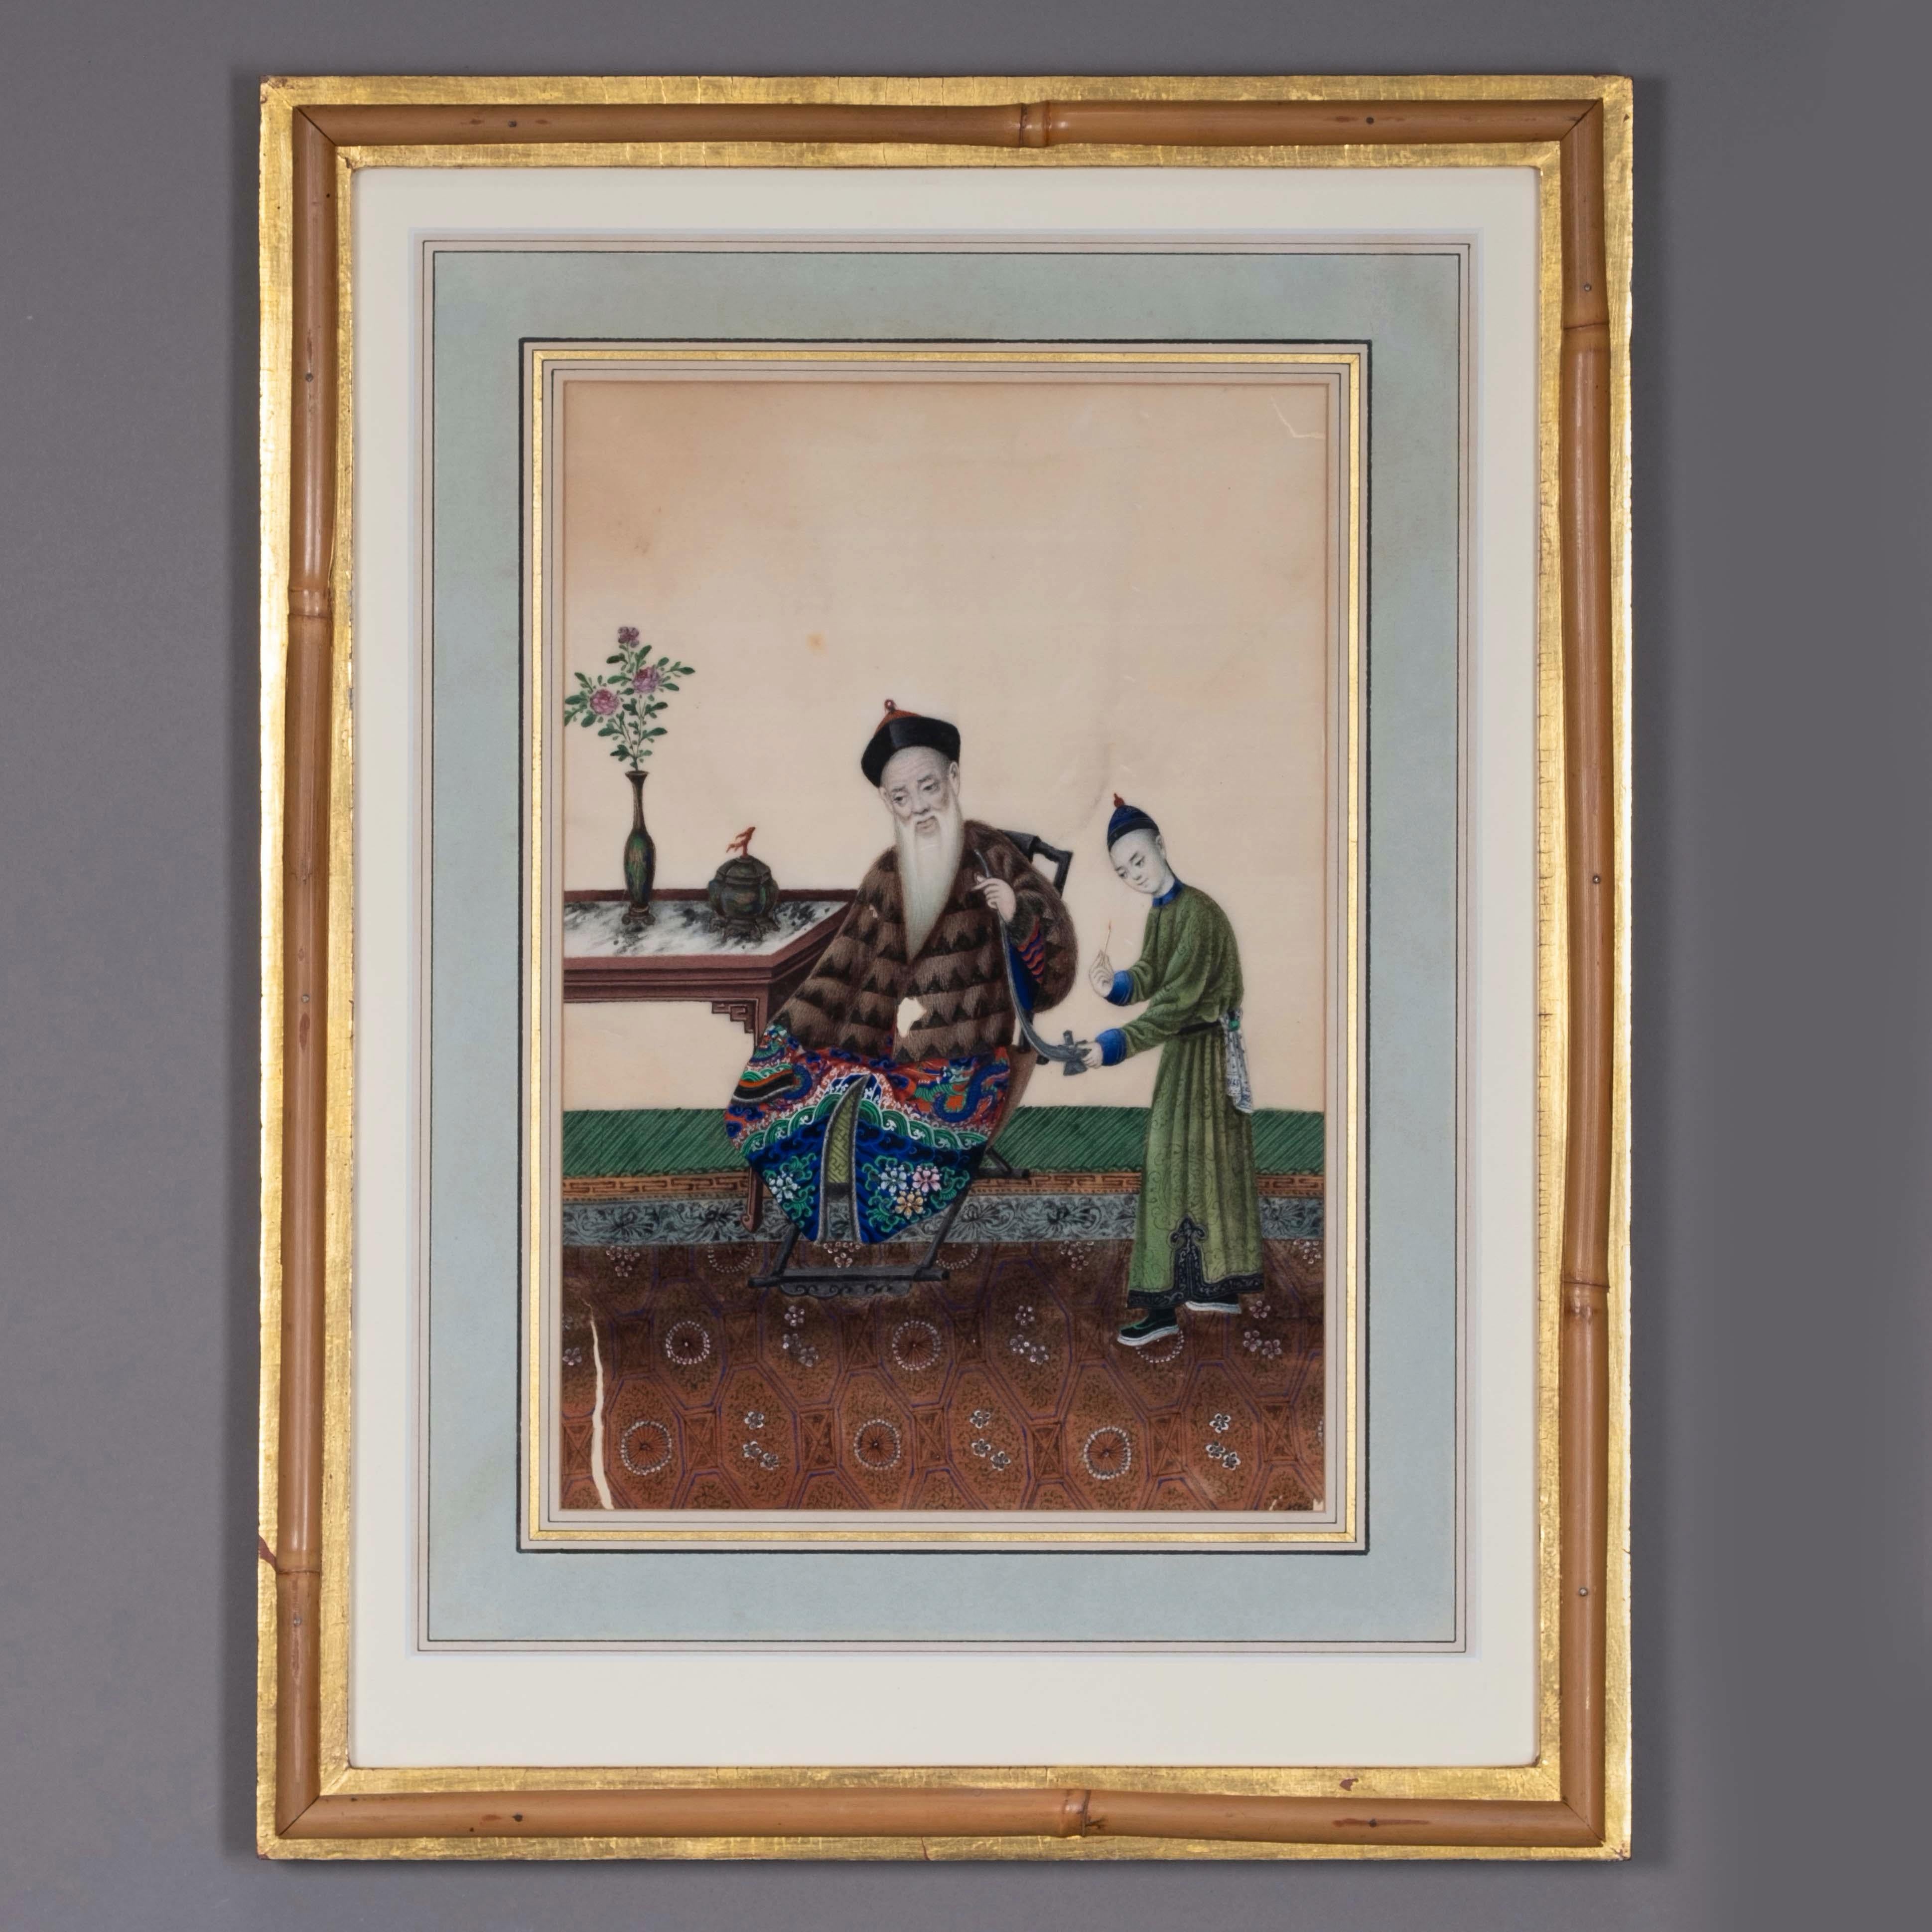 A very fine group of twelve early 19th century Chinese Export rice paper watercolors, each depicting nobles of various ranks. Housed in bamboo mounted crackle gilt frames with watercolor wash mounts.

Dimensions listed refer to outer framed